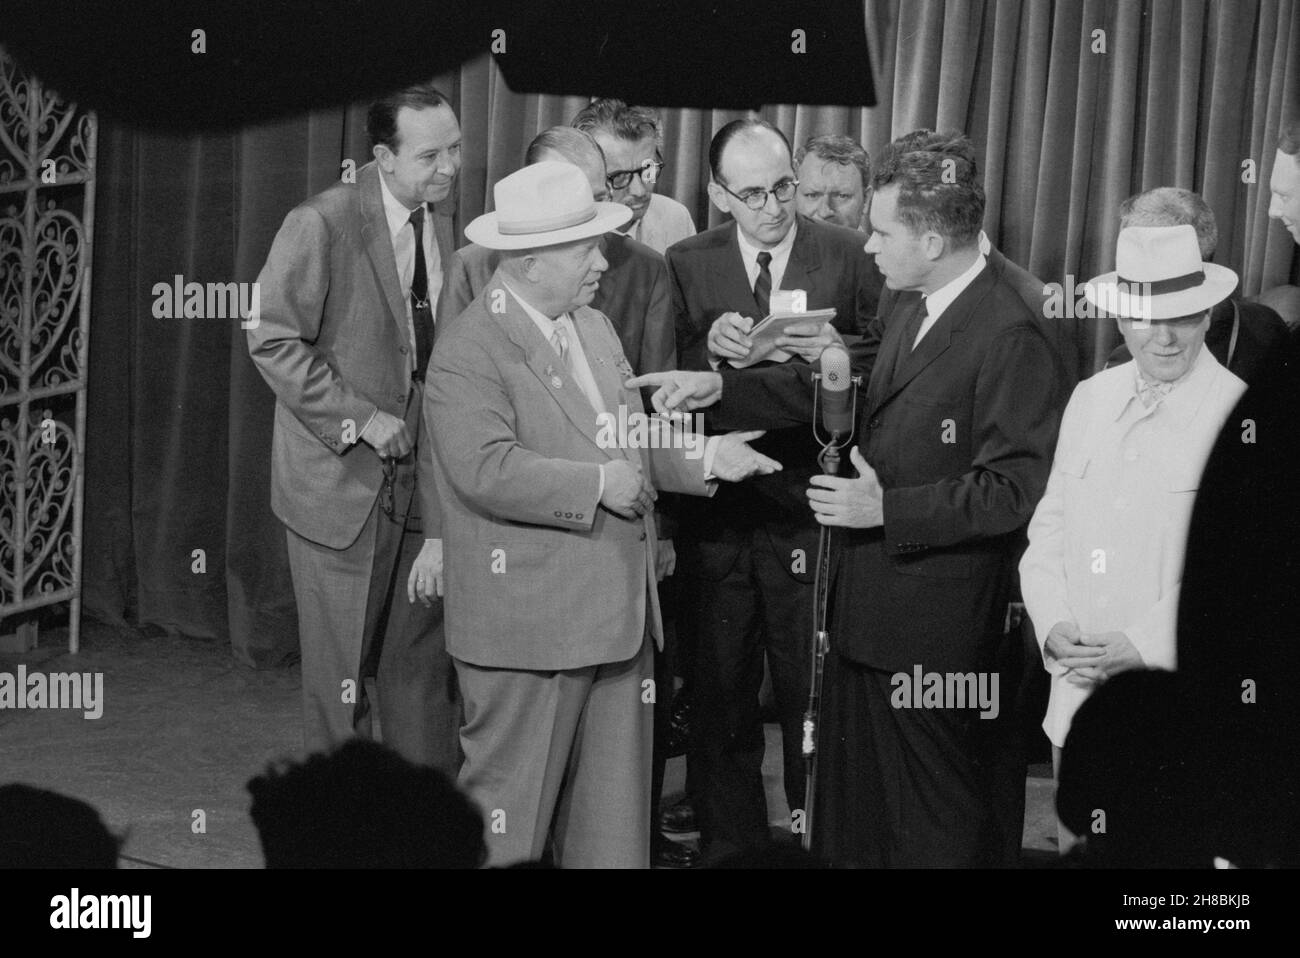 MOSCOW, RUSSIA - 24 July 1959 - Richard Nixon and Nikita Khrushchev debating at the American National Exhibition in Moscow, Russia in July 1959, it la Stock Photo